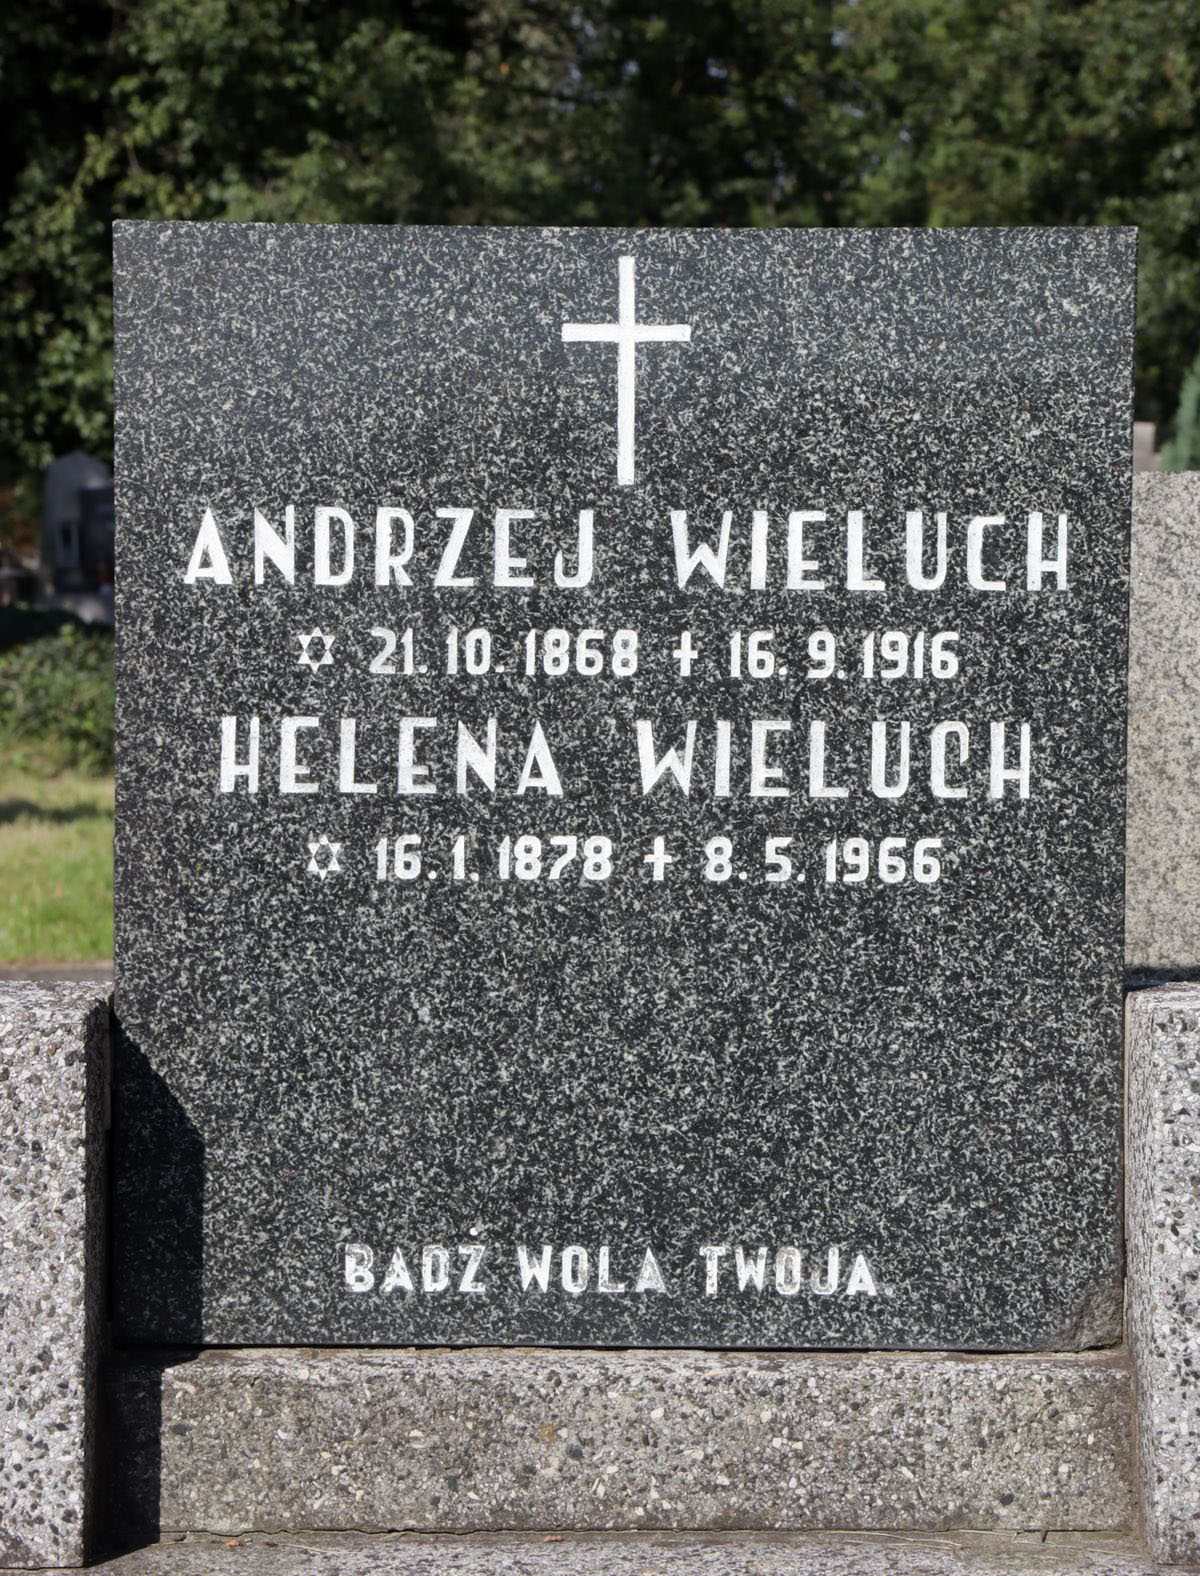 Inscription from the tombstone of Andrzej and Helena Wieluch, Sibica cemetery